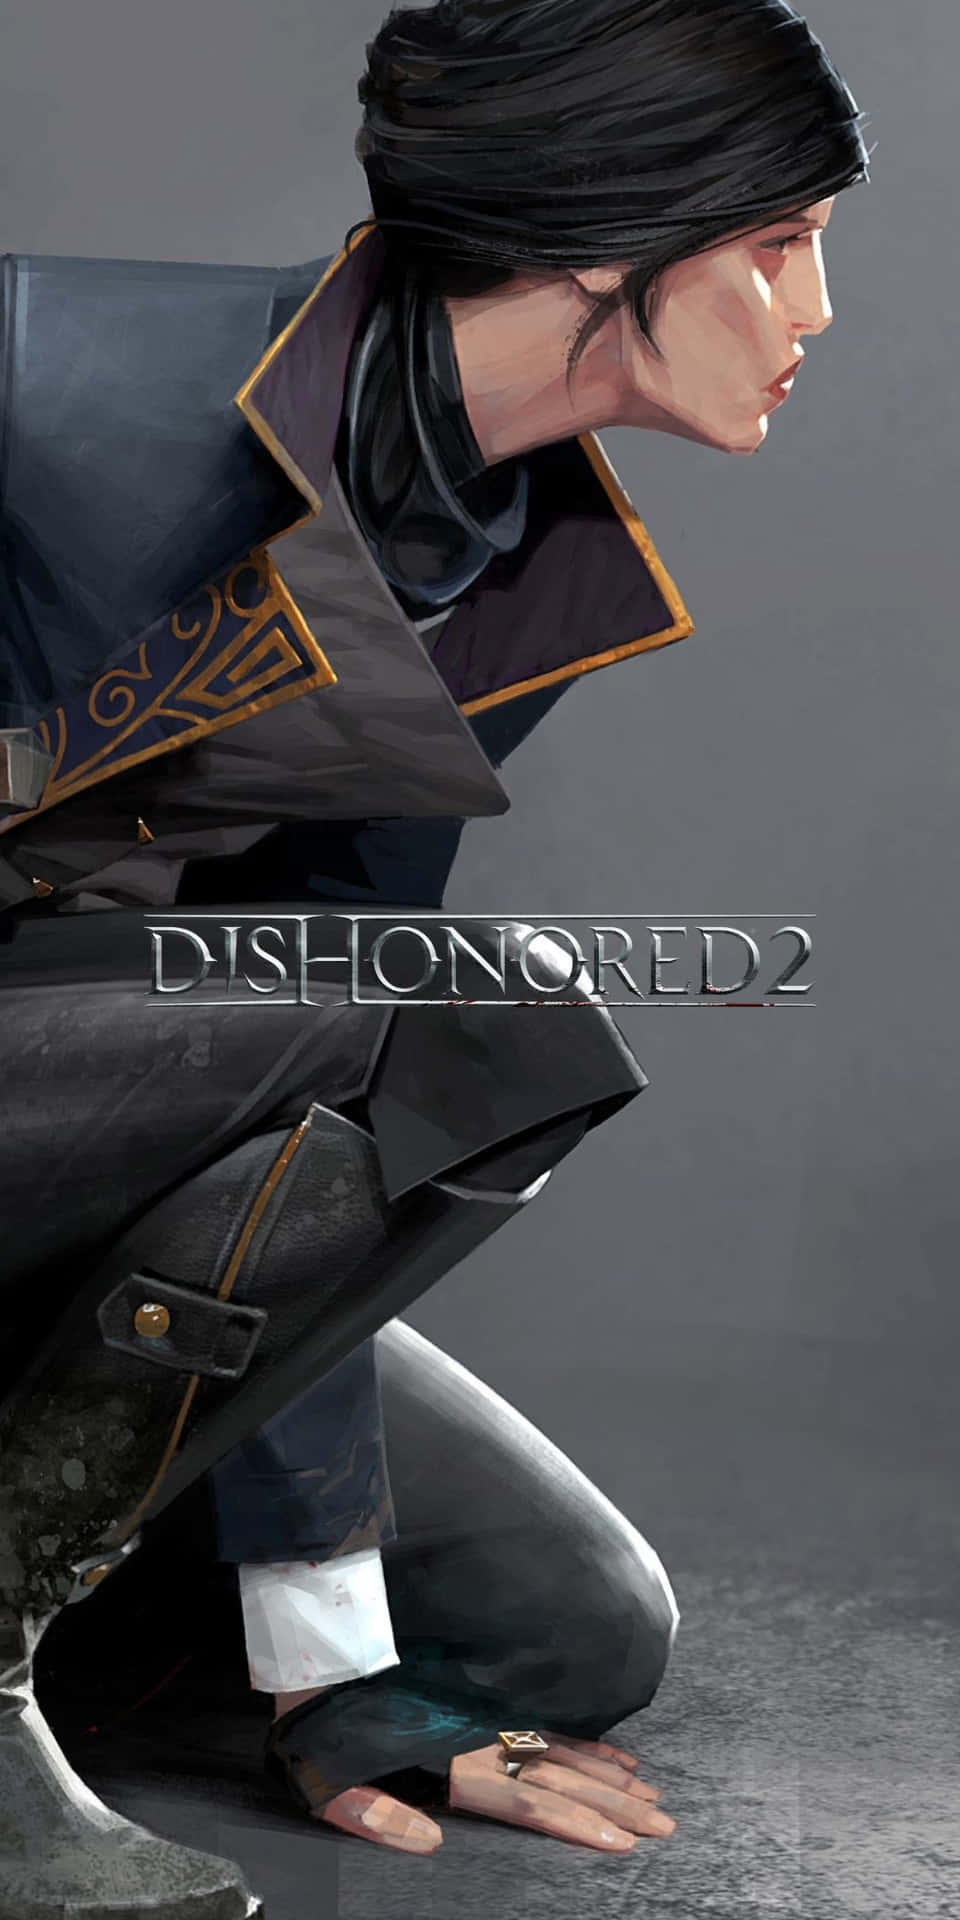 Dishonored 2 - A Character Kneeling Down